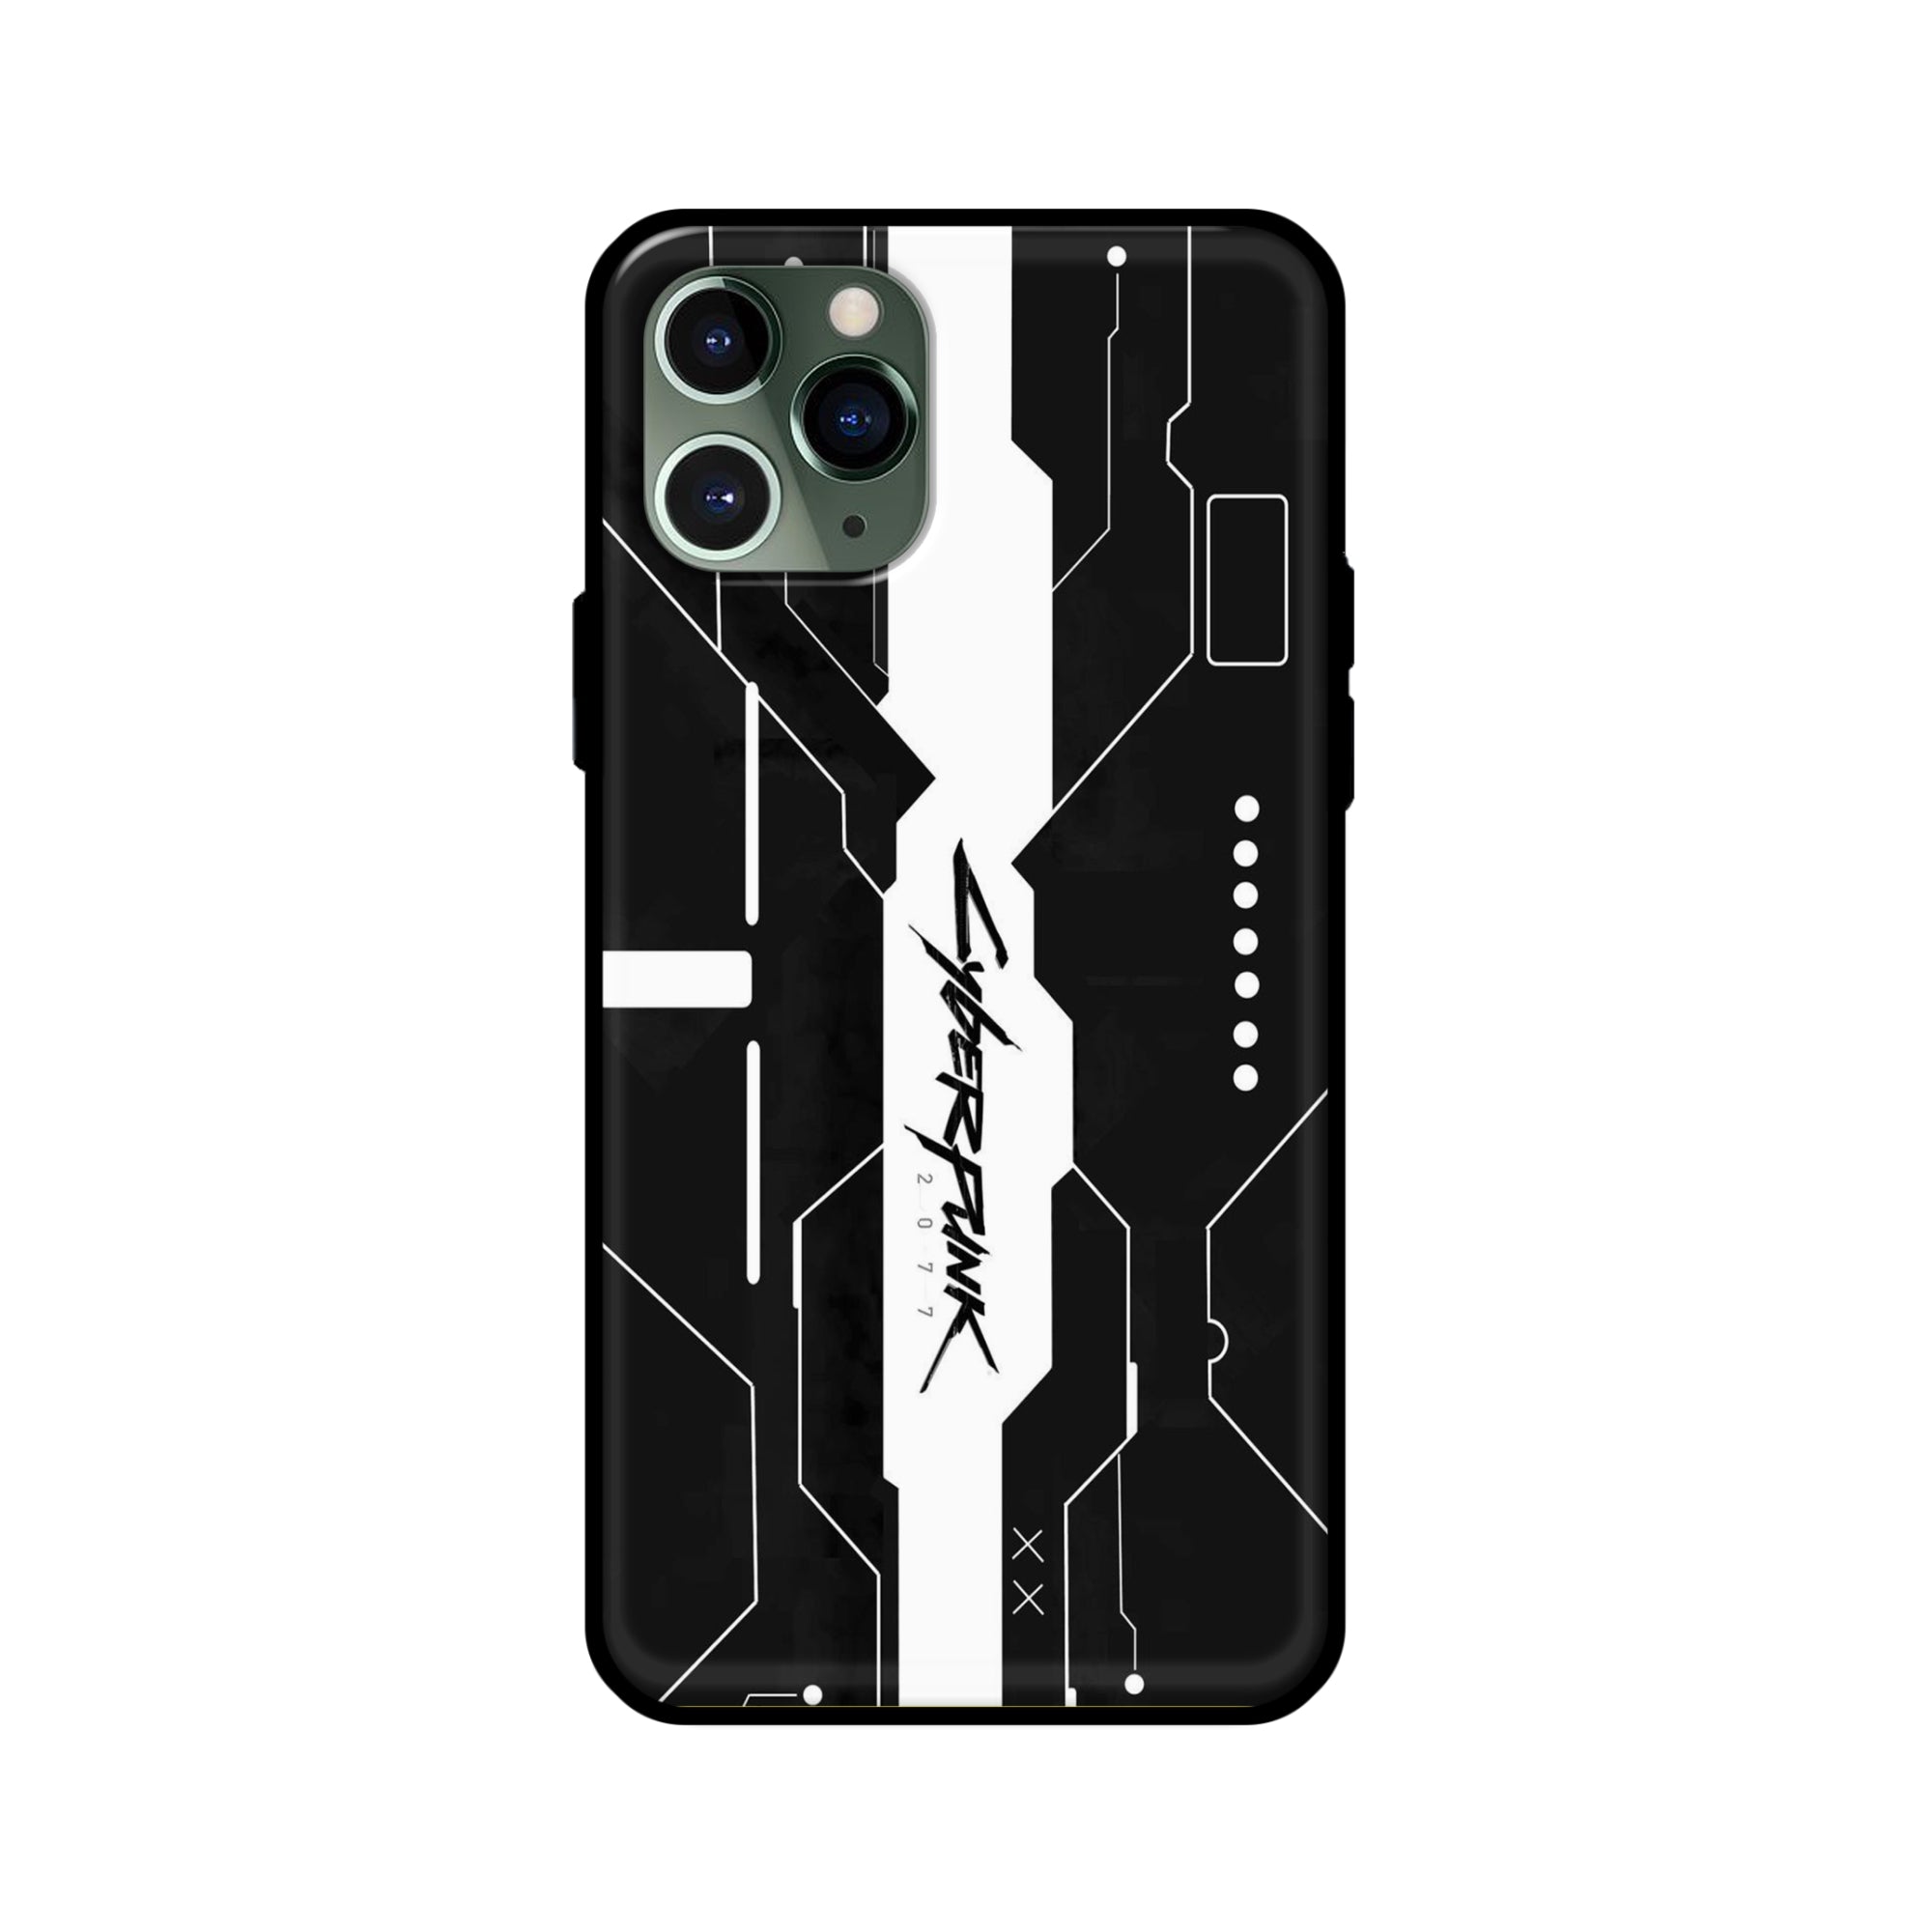 Buy Cyberpunk 2077 Art Glass/Metal Back Mobile Phone Case/Cover For iPhone 11 Pro Online